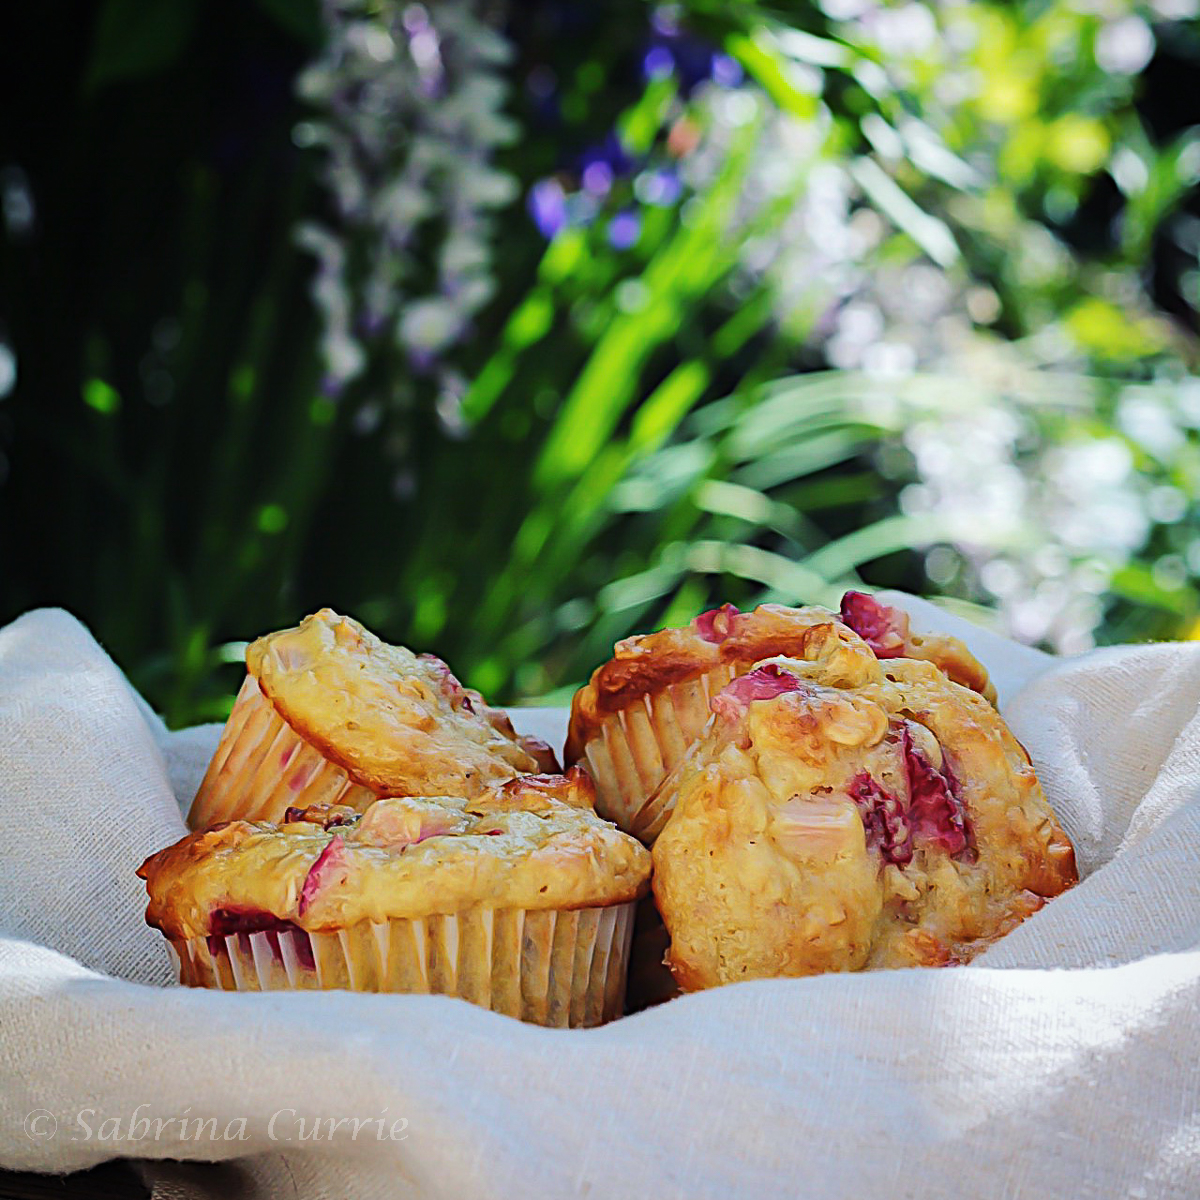 Strawberry rhubarb muffins in a bowl in front of a green garden.